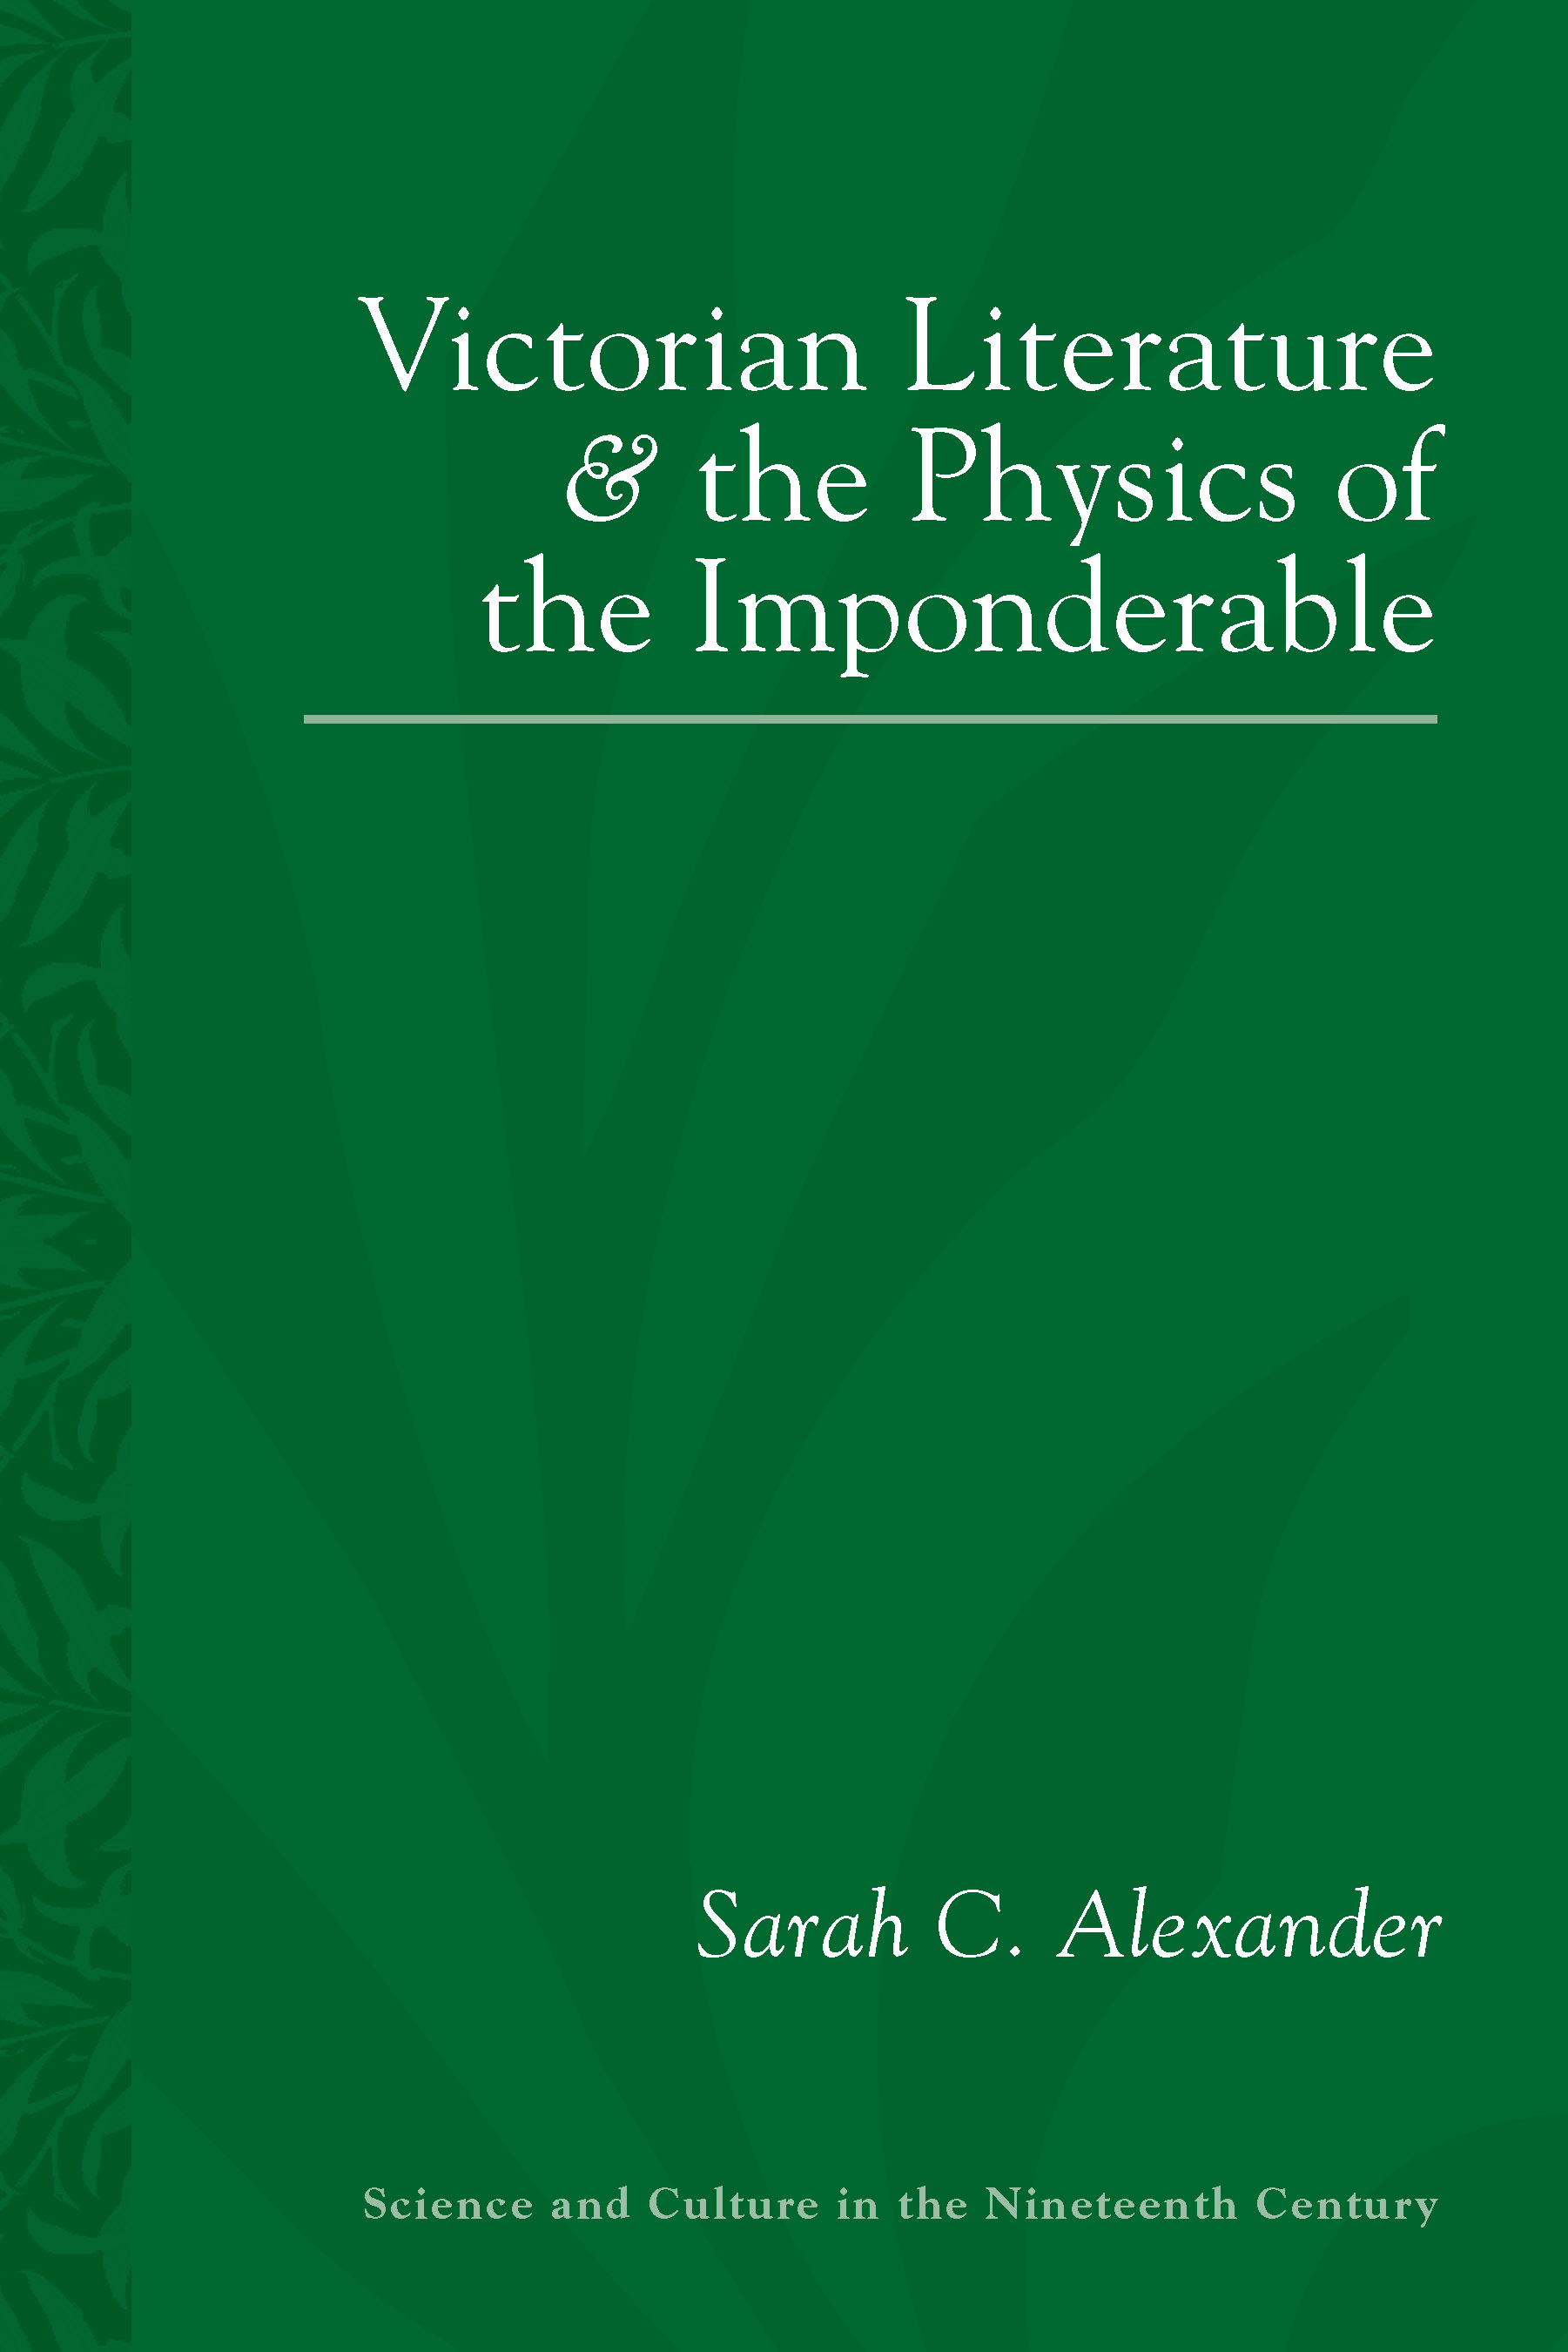 cover of Victorian Literature and the Physics of the Imponderable by Sarah Alexander